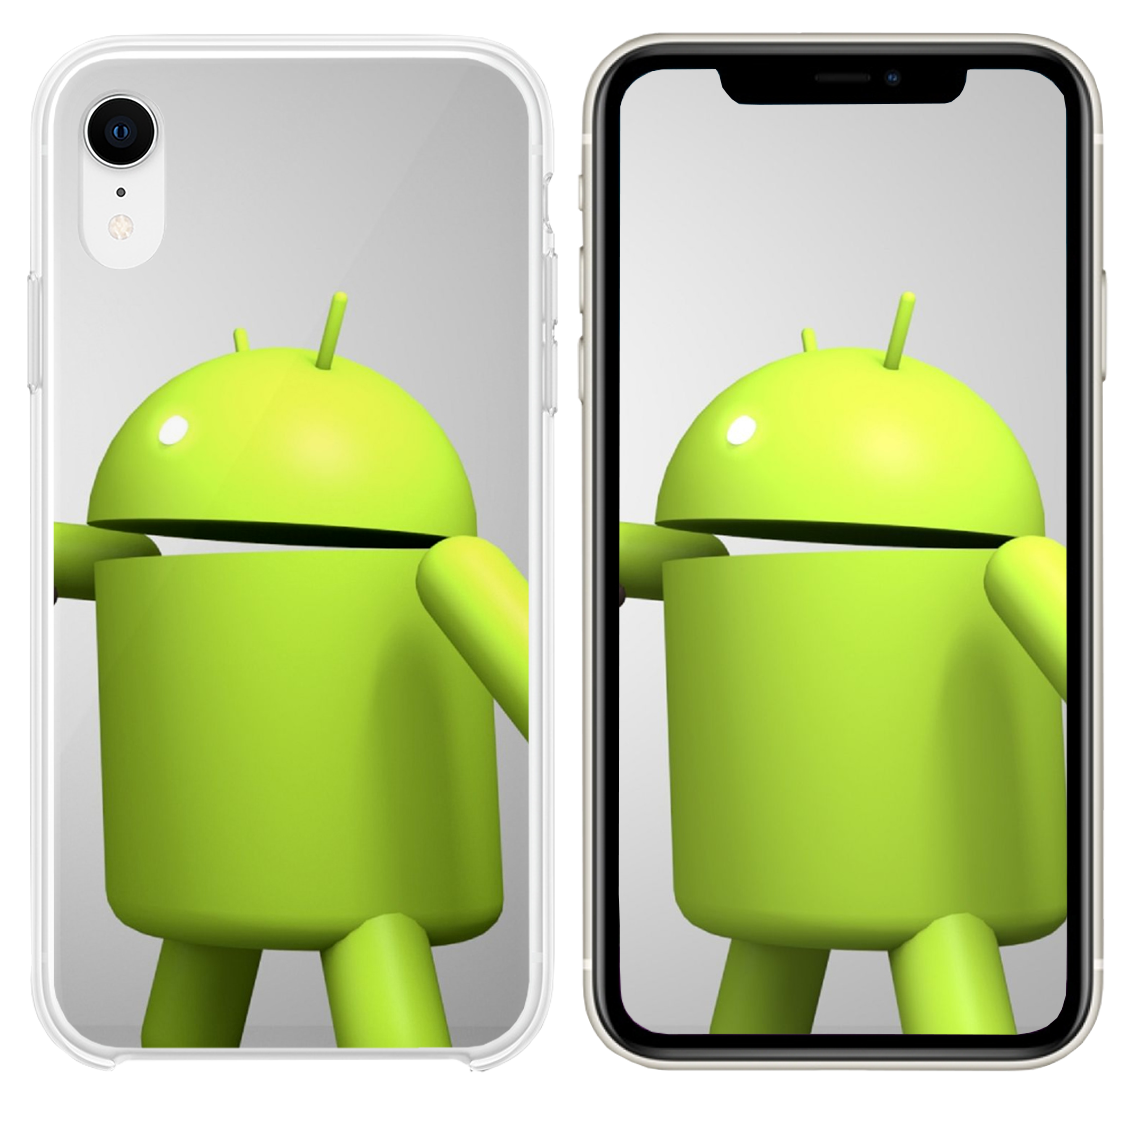 Android Vs Apple , HD Wallpaper & Backgrounds